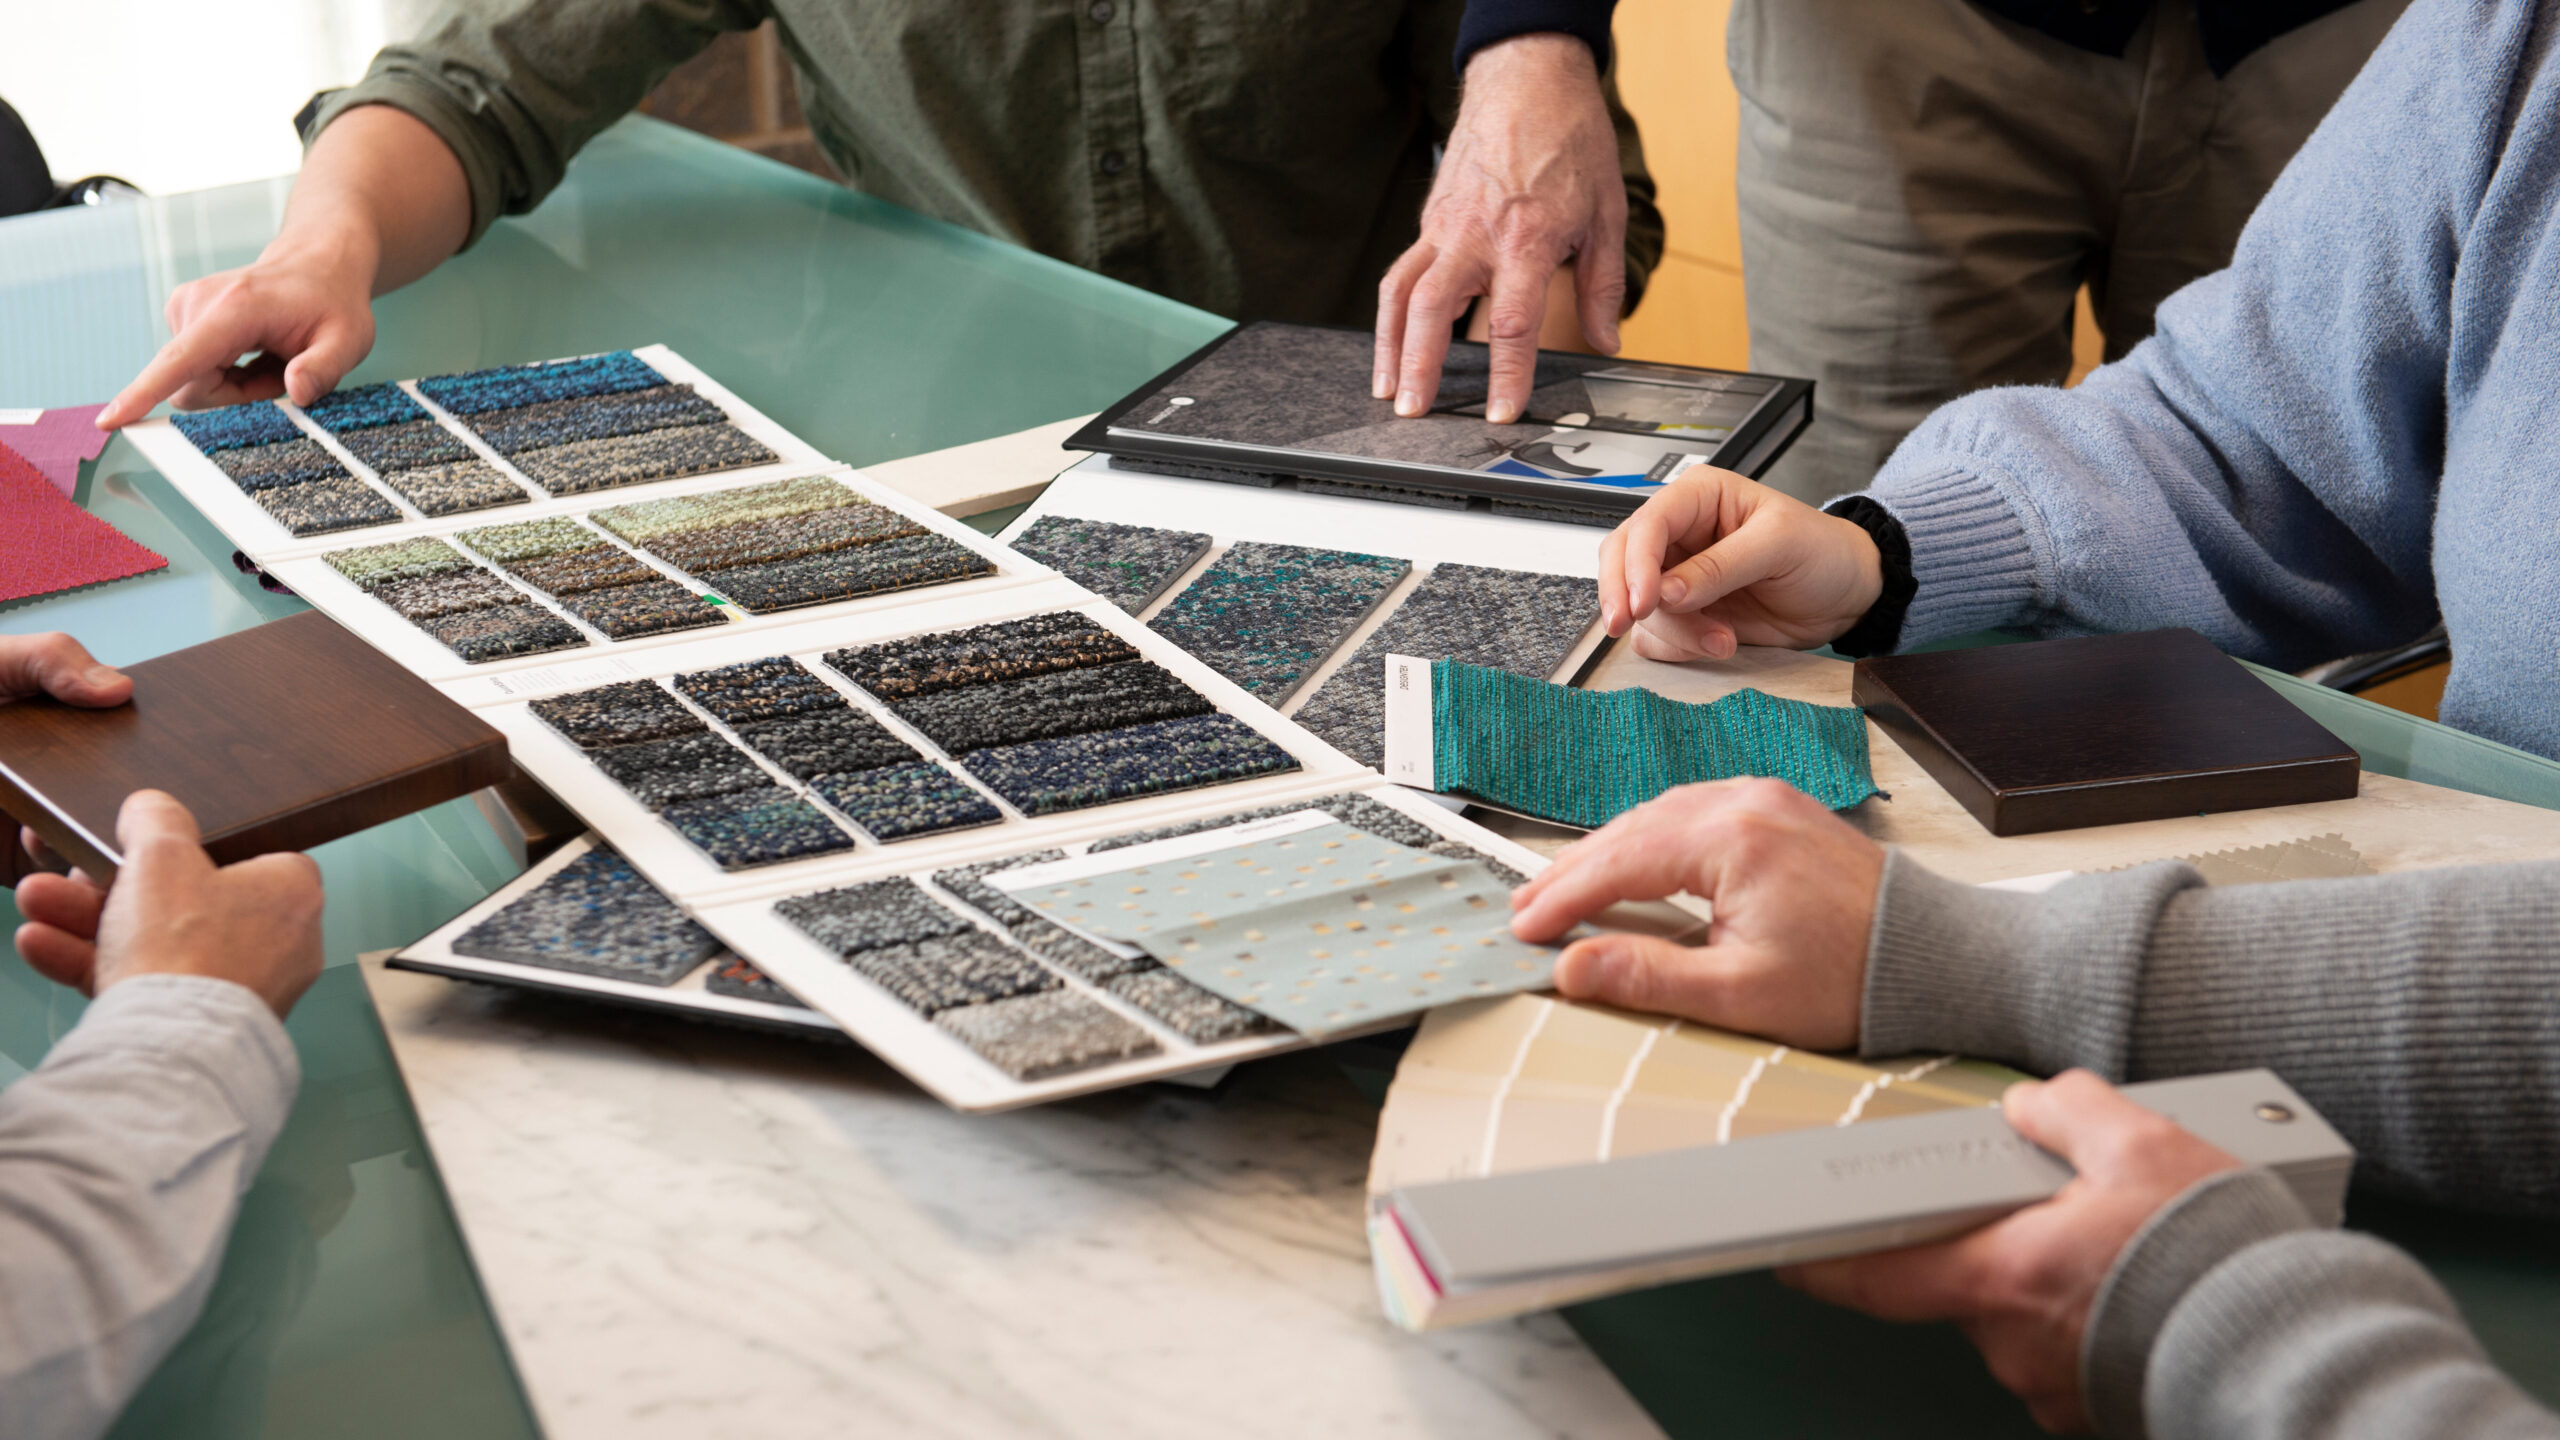 Designers are looking through different interior design materials to help develop a consistent interior brand for a client. They are looking at carpet samples, counter top samples, and paint samples. 